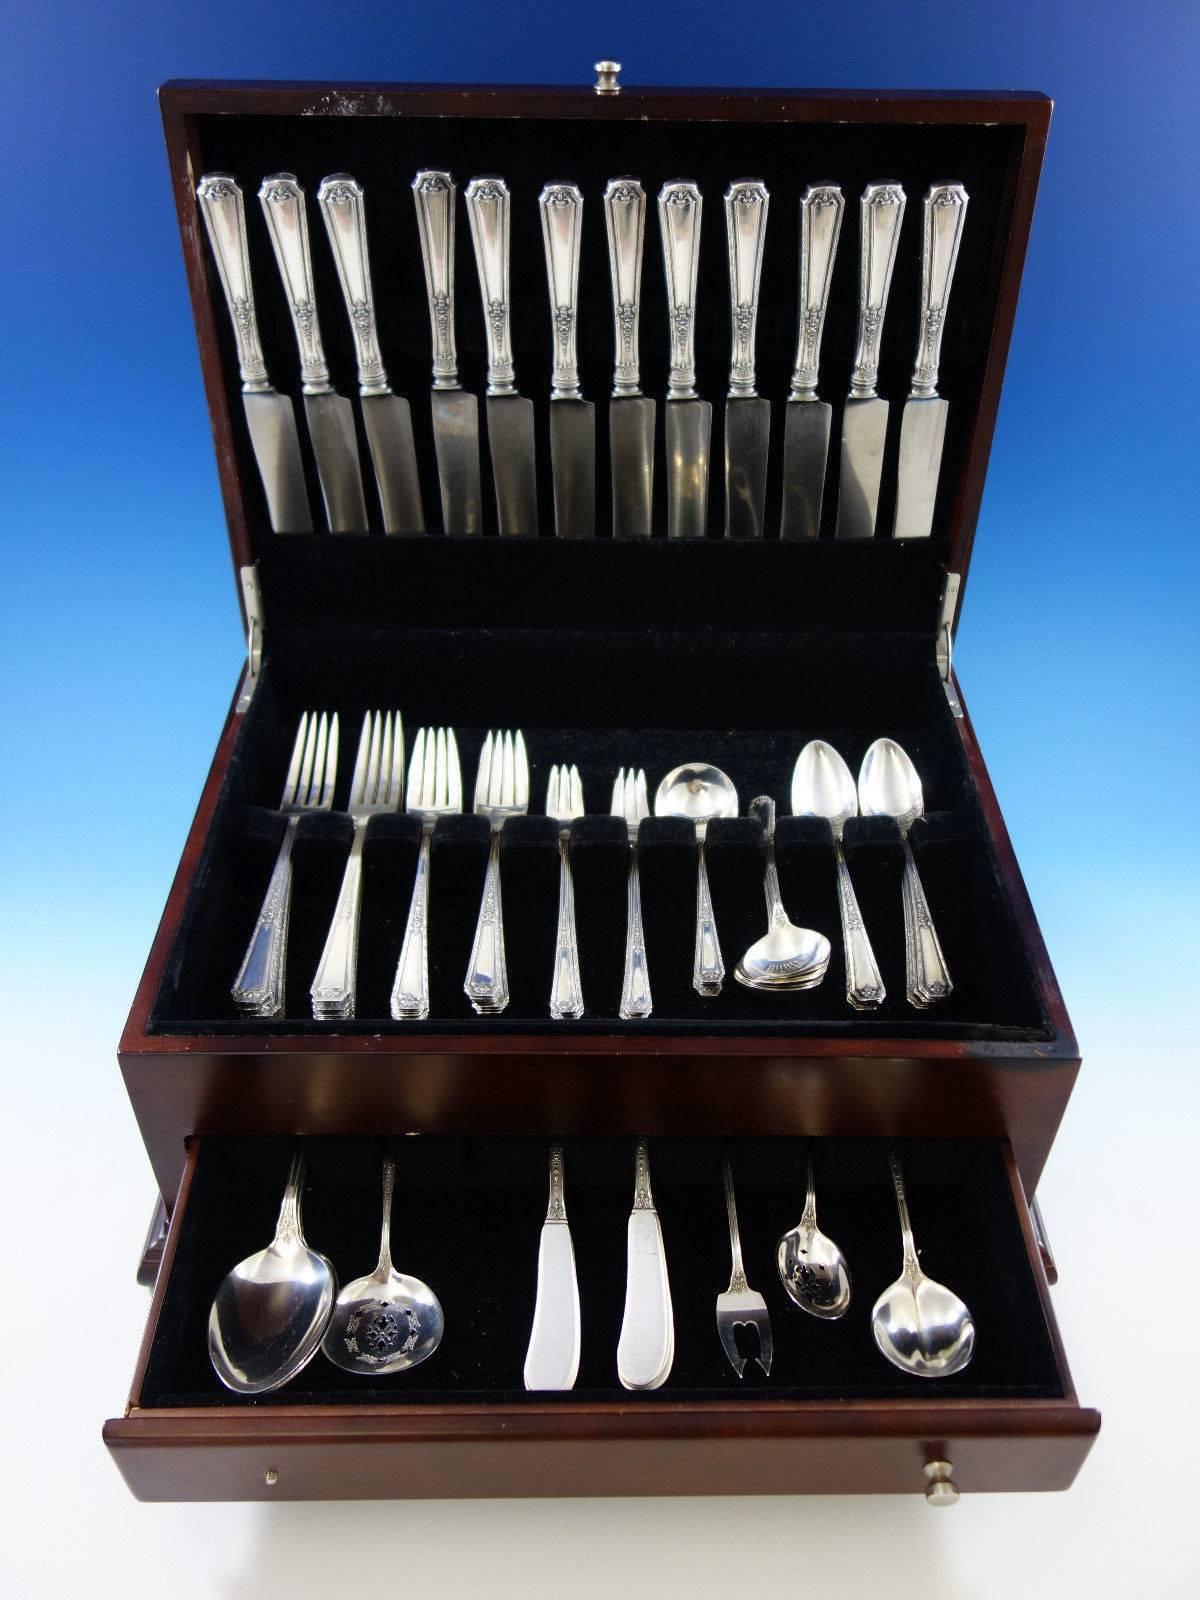 Louis XIV by Towle sterling silver flatware set, 91 pieces. This set includes: 

12 knives, 9 1/4